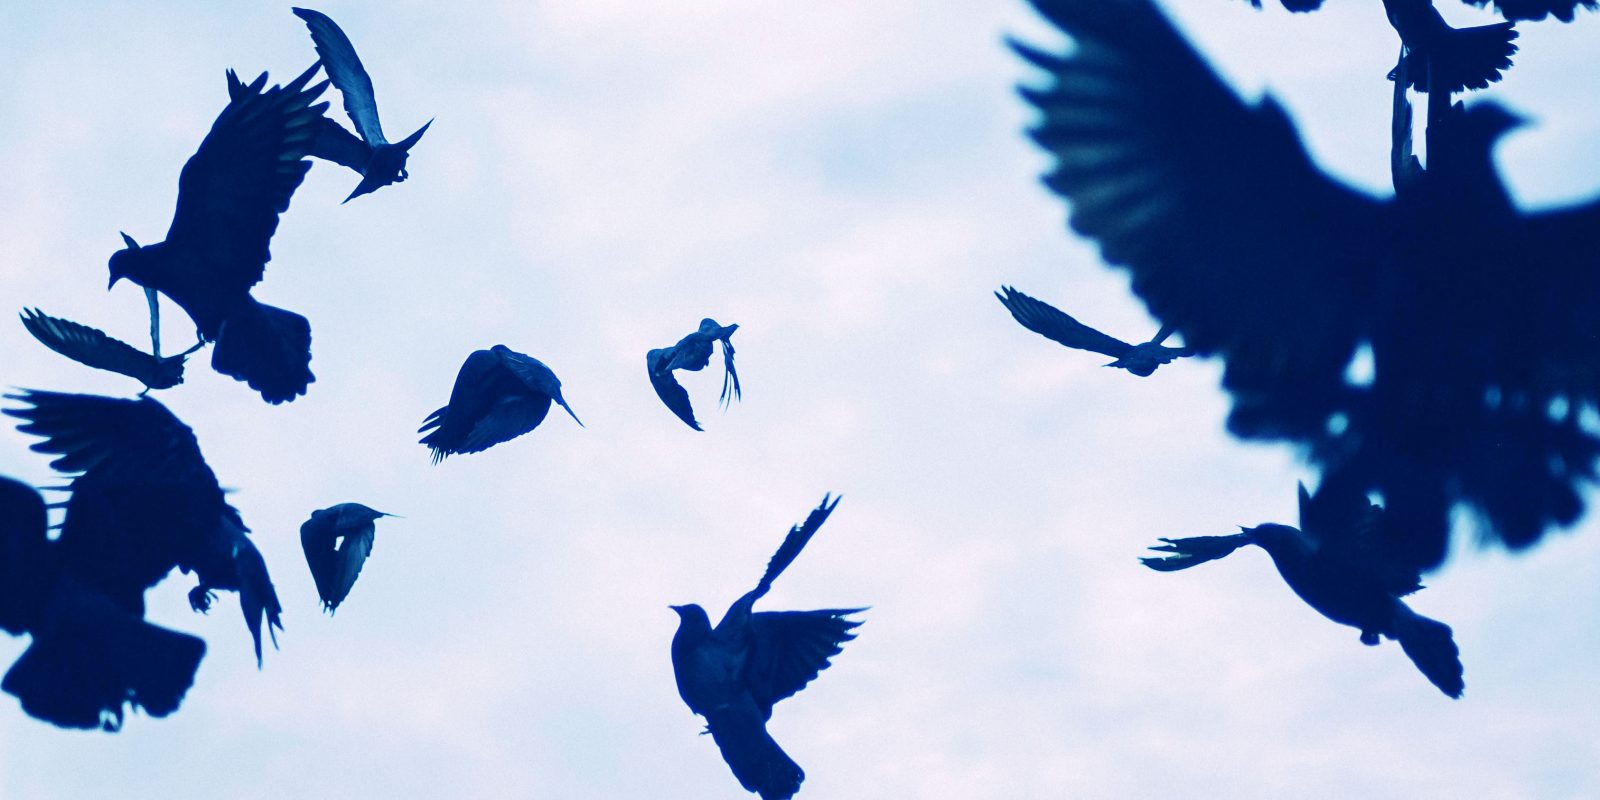 Twitter chaos | Birds flying chaotically